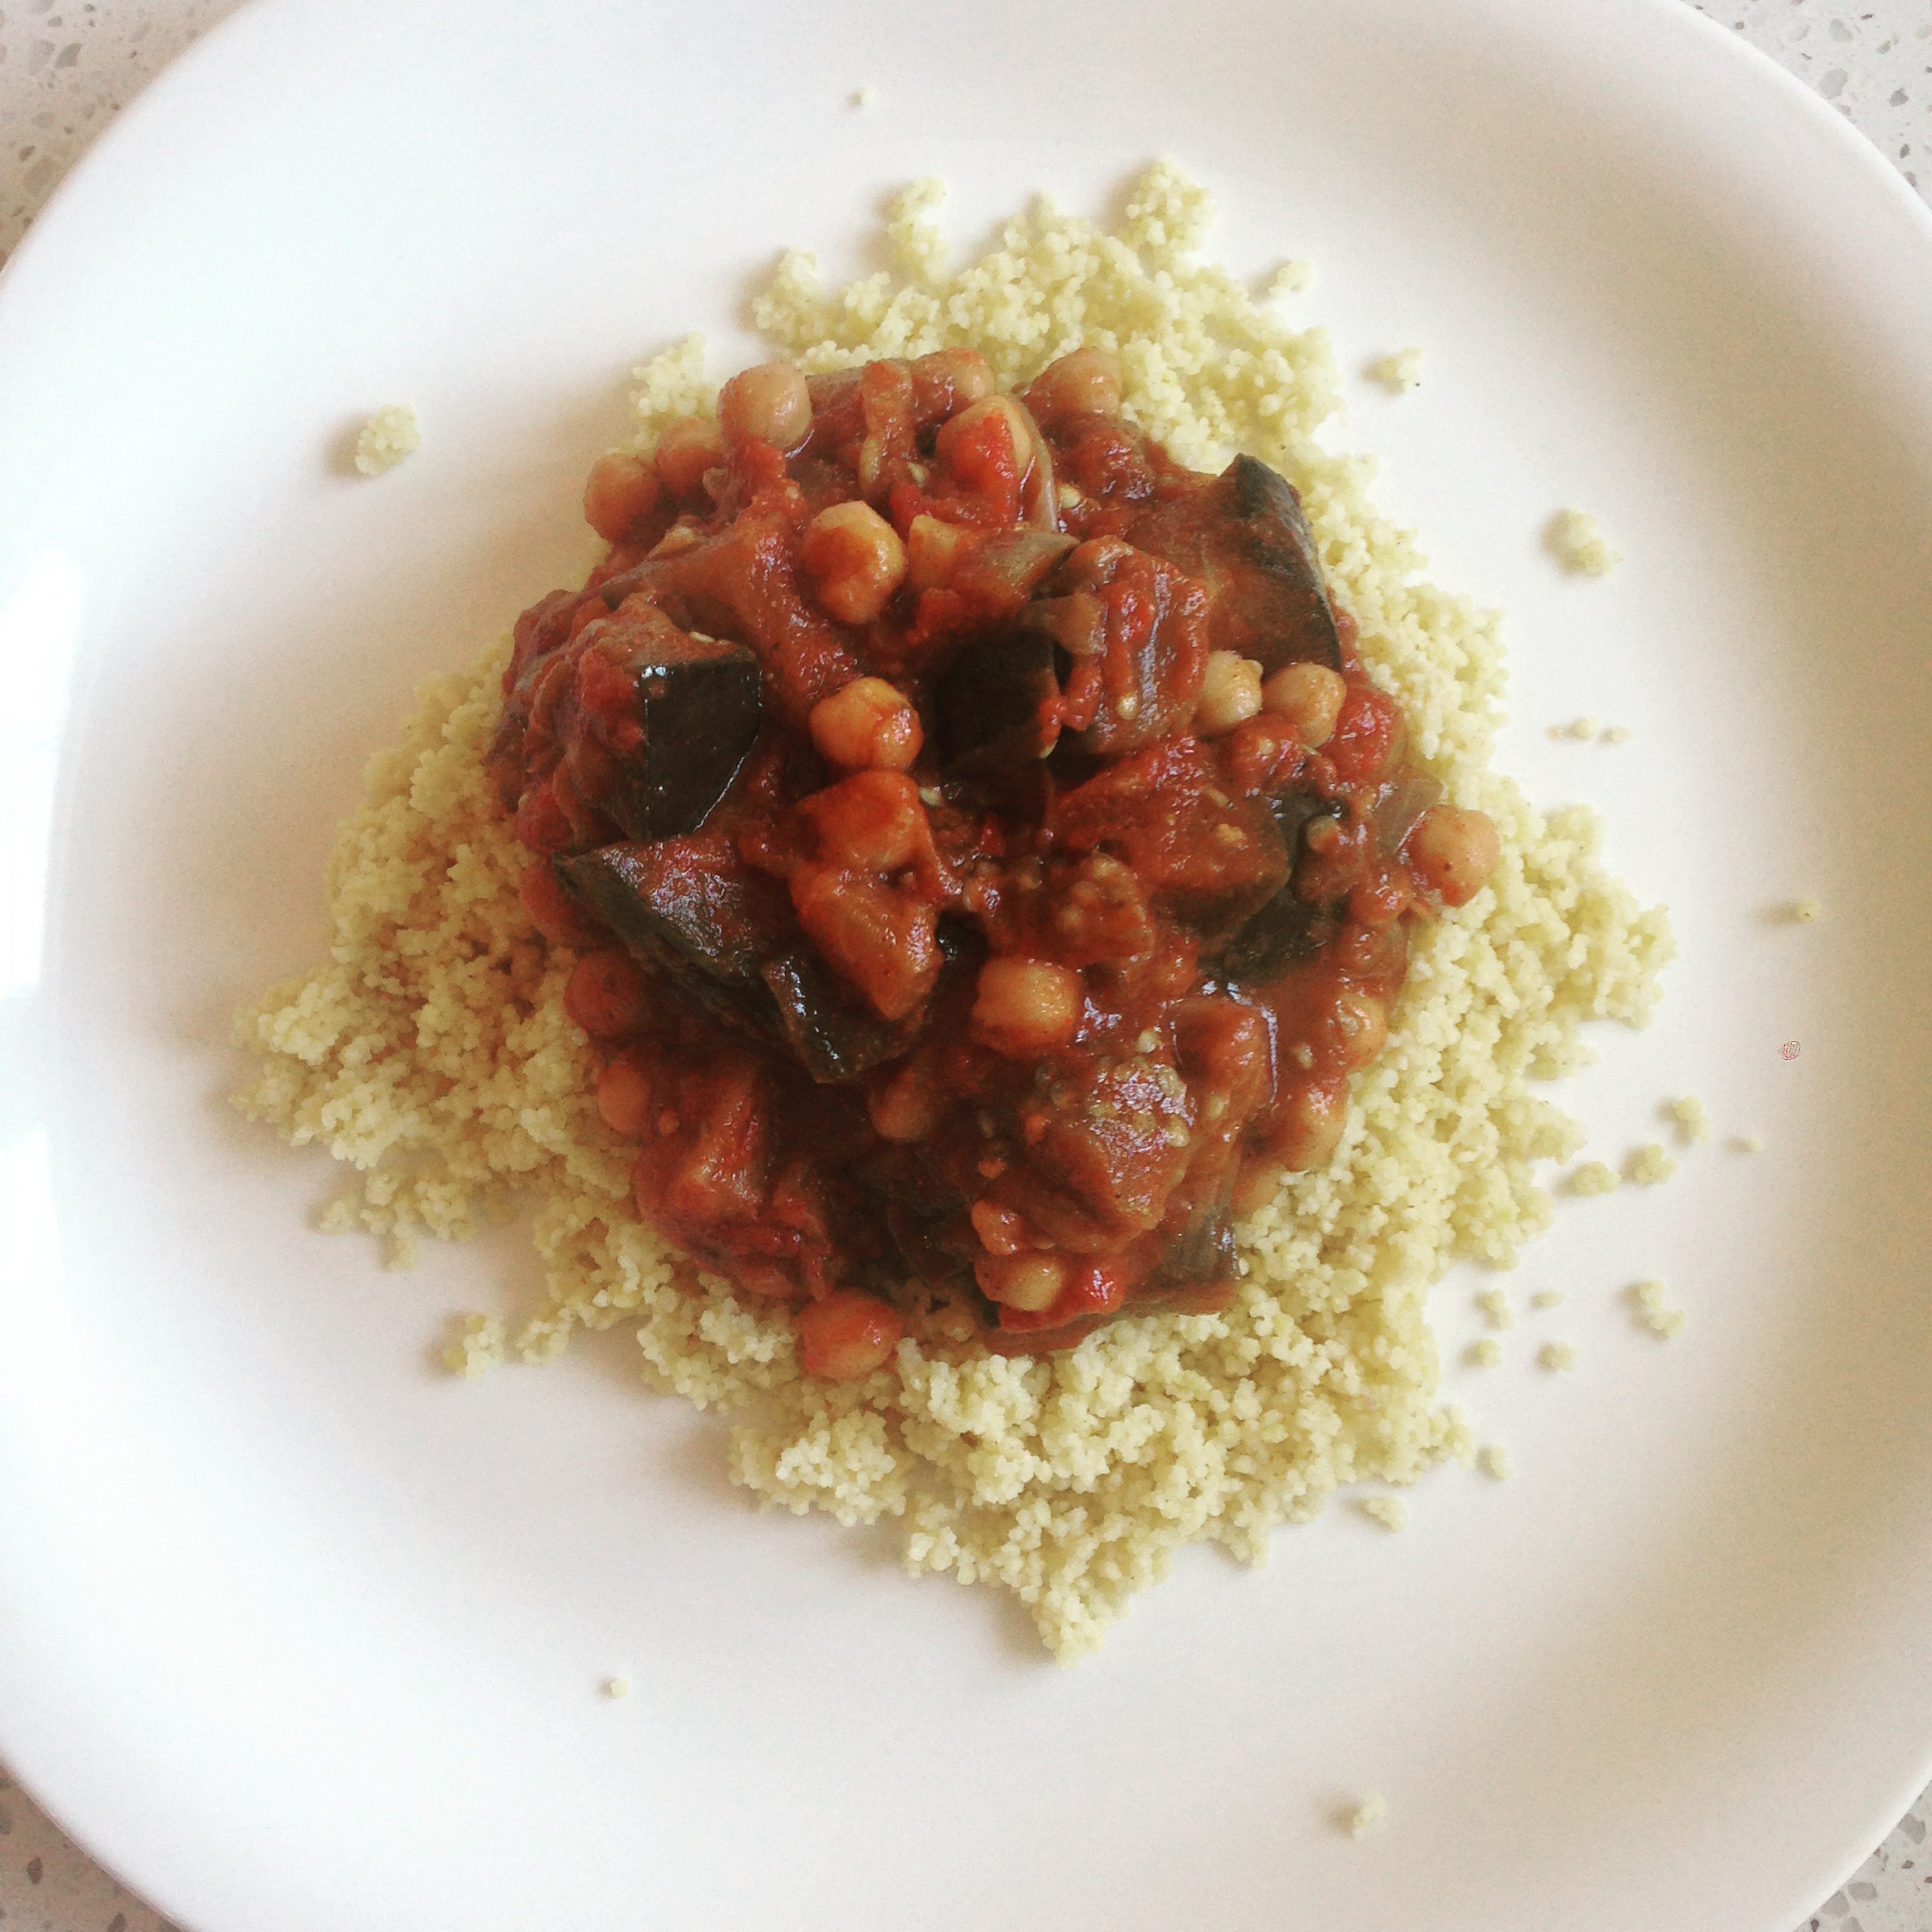 ★ Healty MOROCCAN CHICKPEA AND EGGPLANT (AUBERGINE) STEW